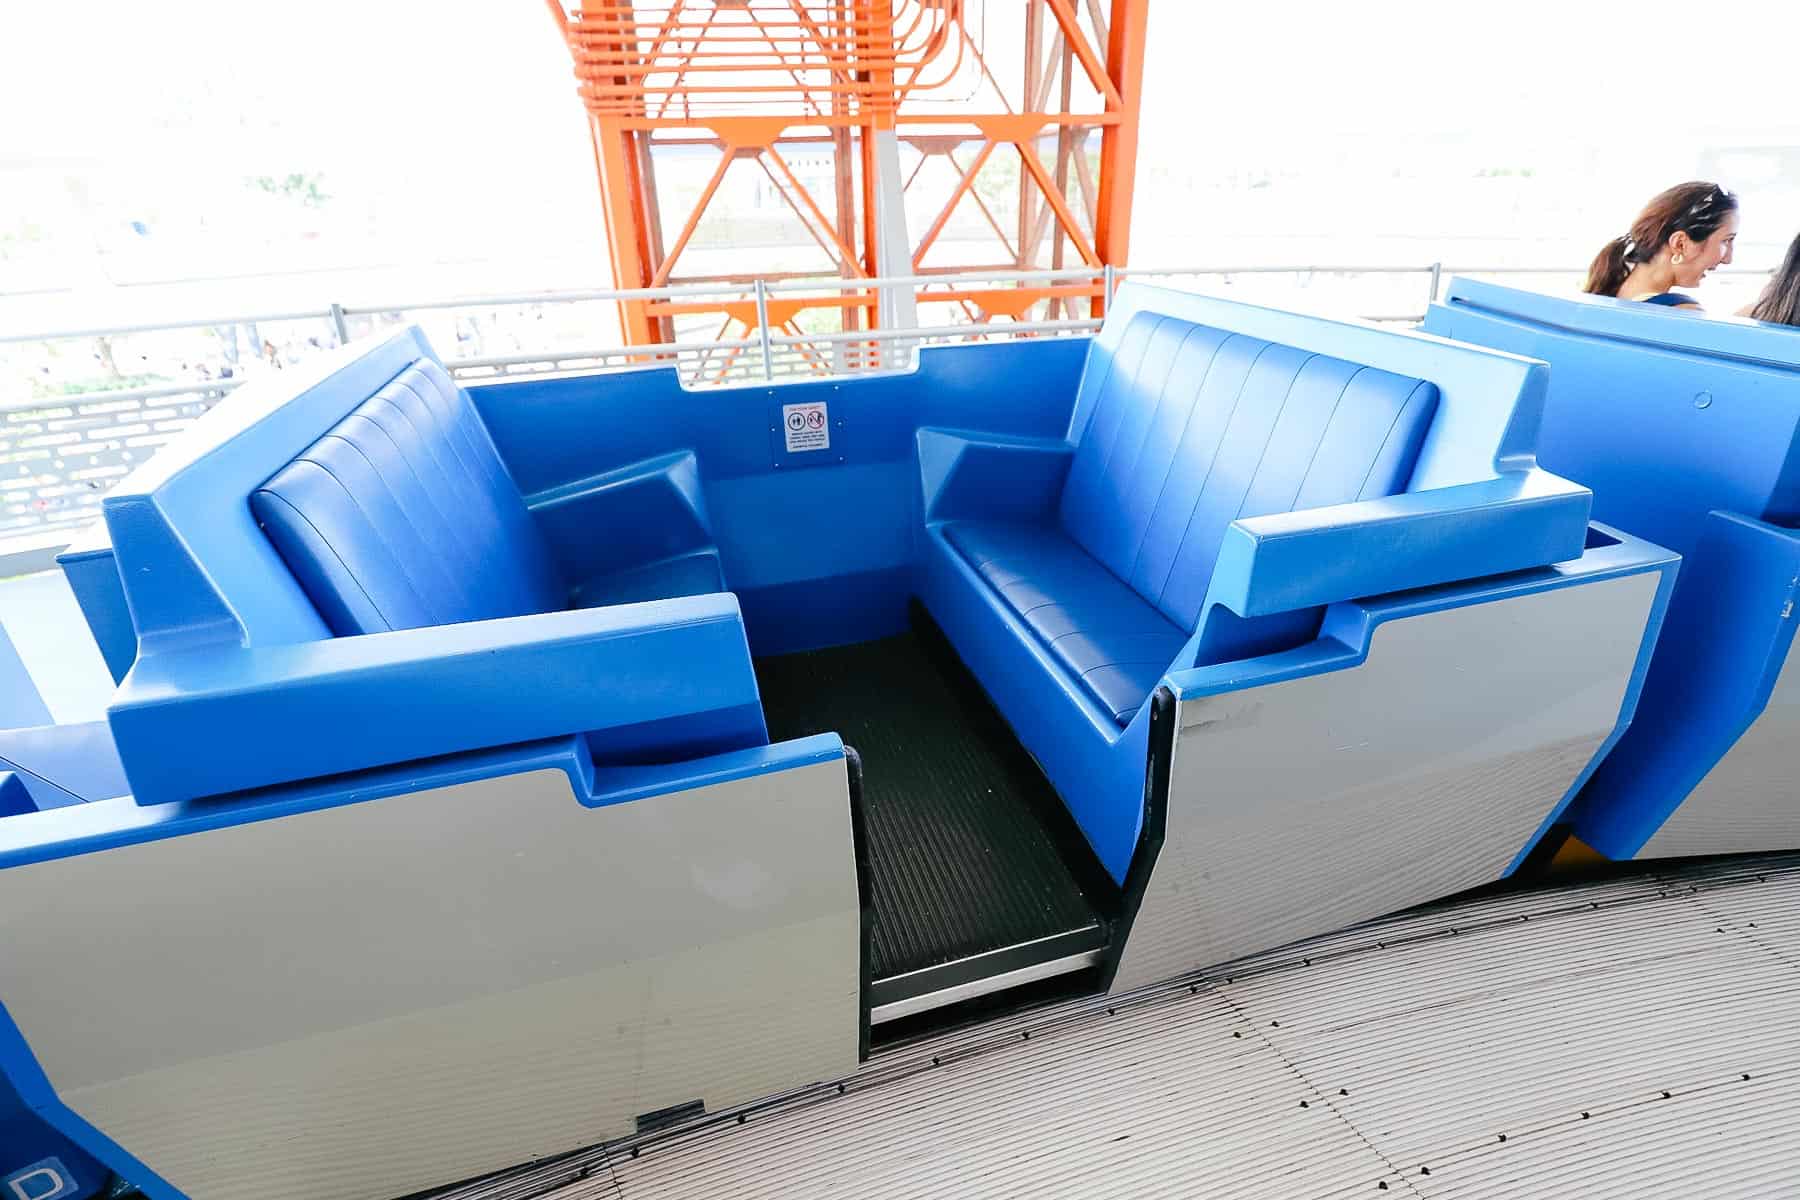 Peoplemover ride vehicle sits approximately 4-6 guests. 